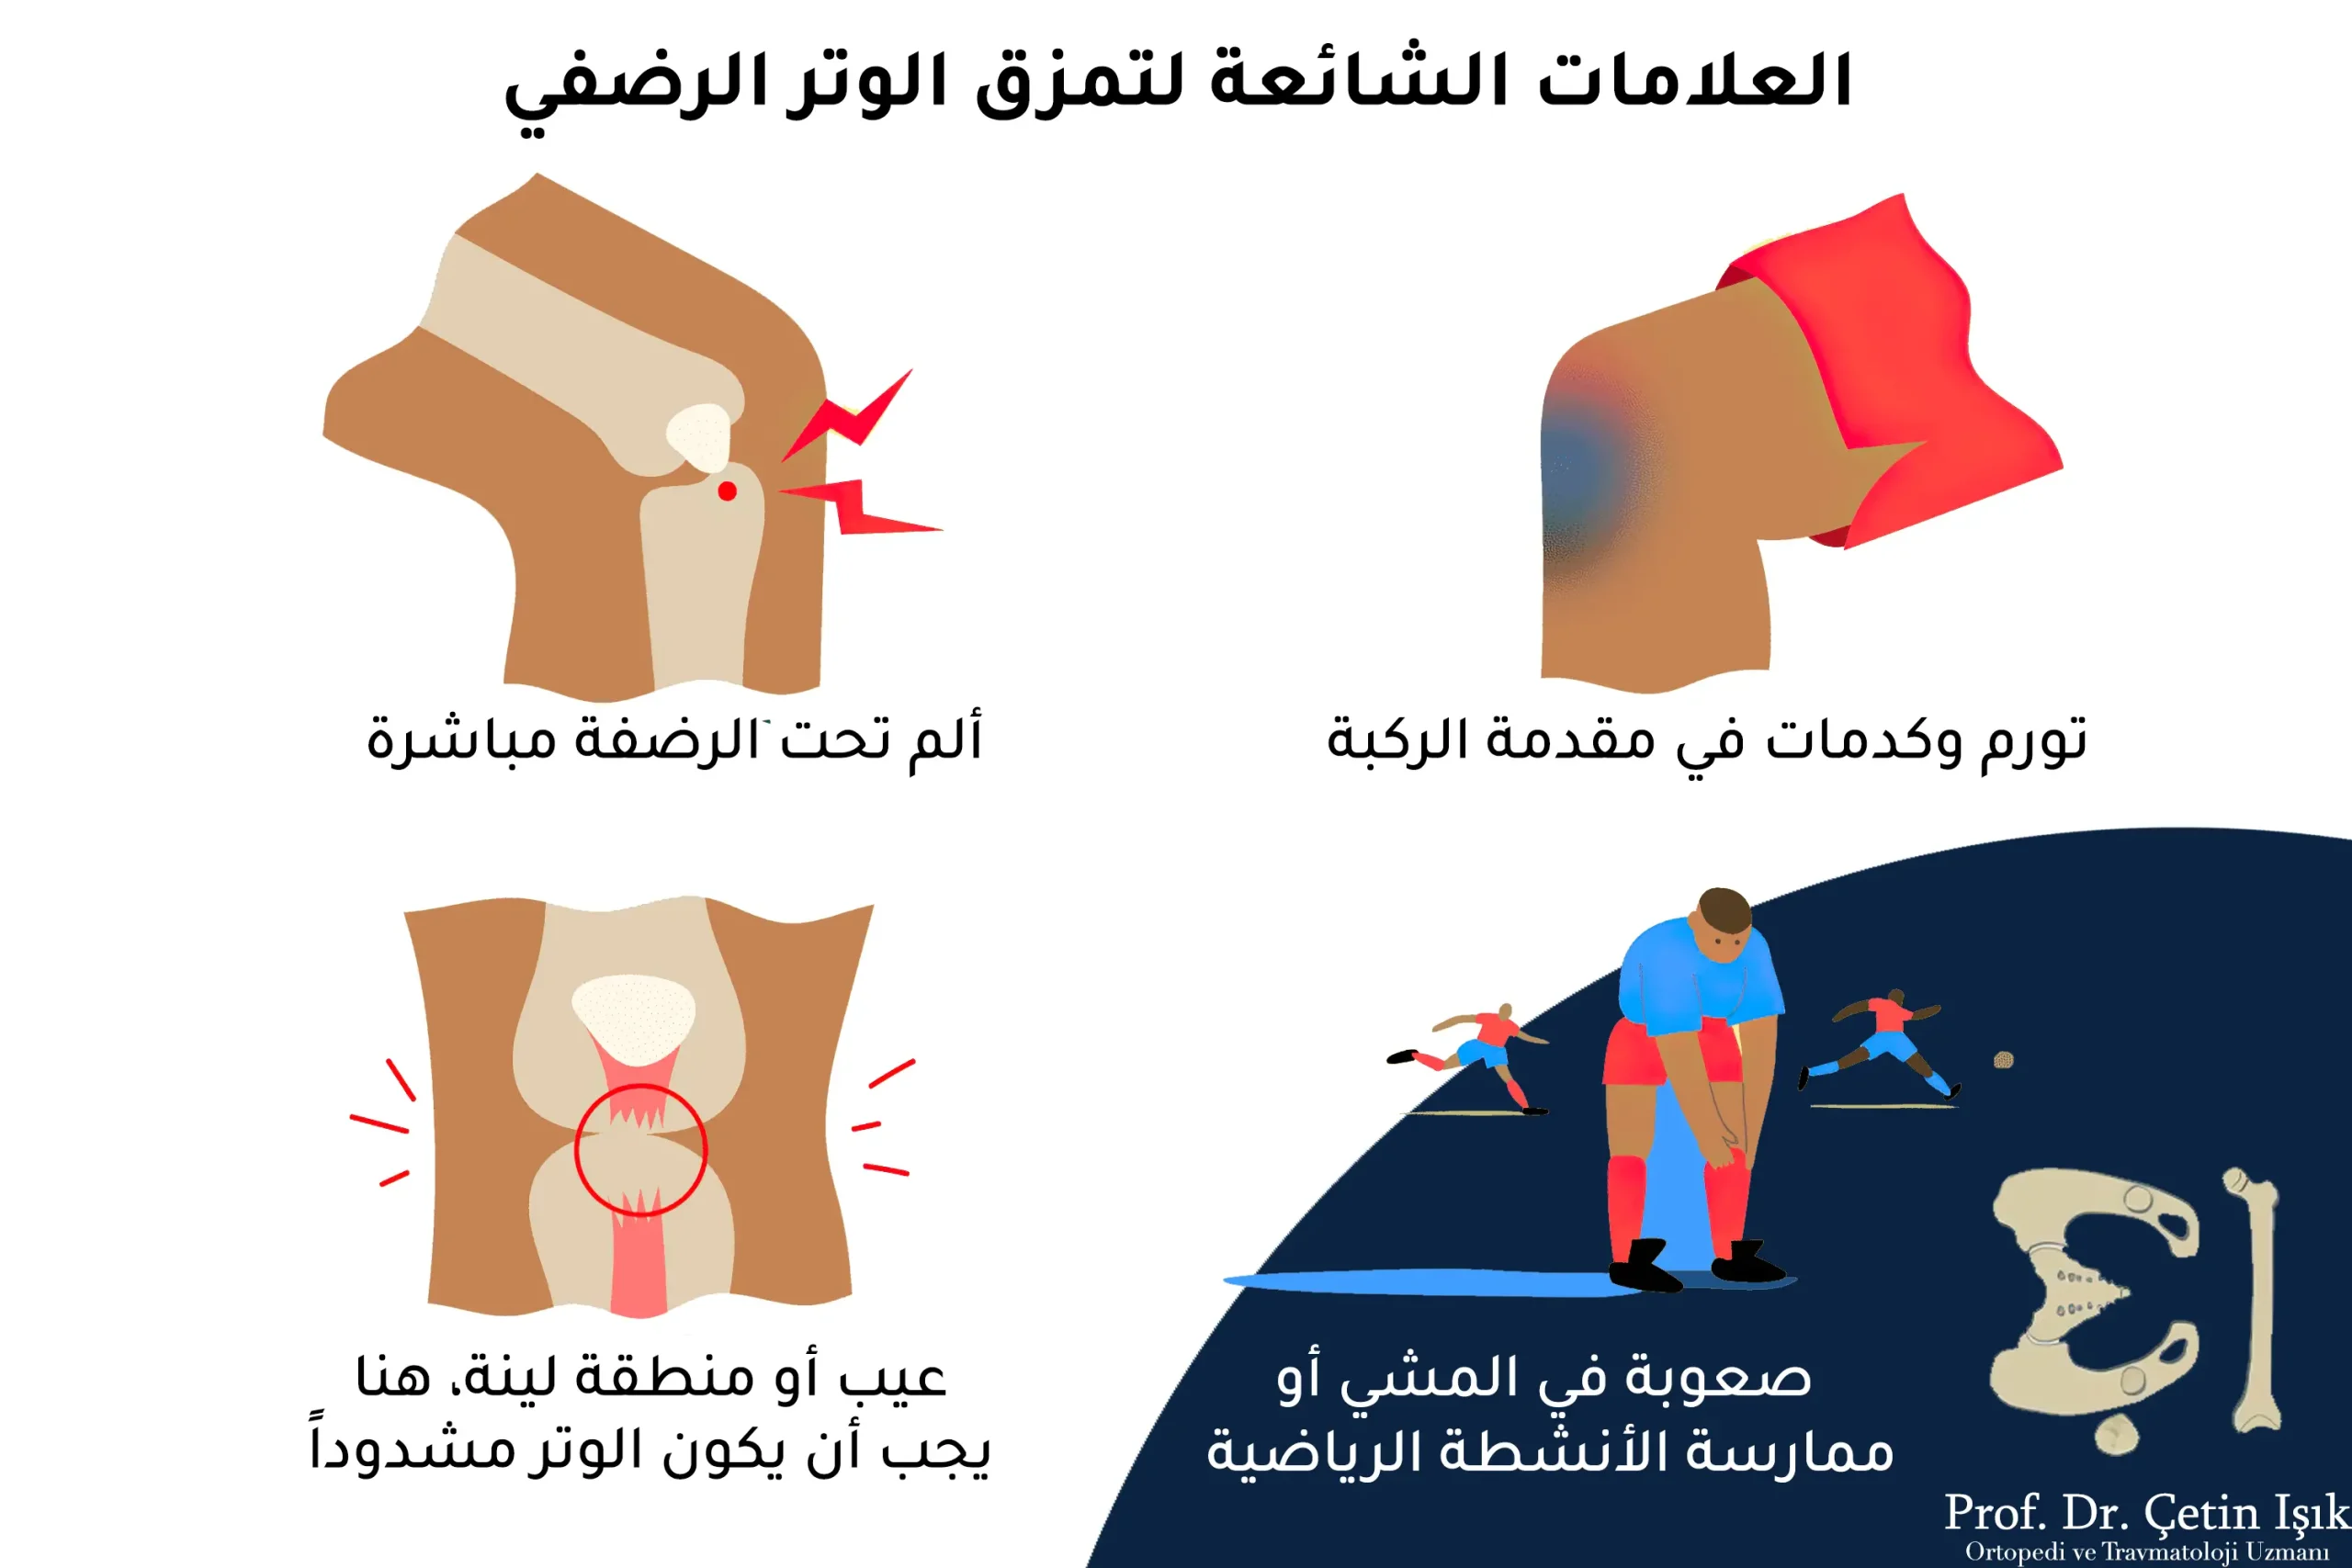 From the picture, we note the common symptoms when knee tendonitis occurs, which are swelling and bruising in the knee, knee pain, difficulty in exercising activities, and rupture of the inflamed tendon.